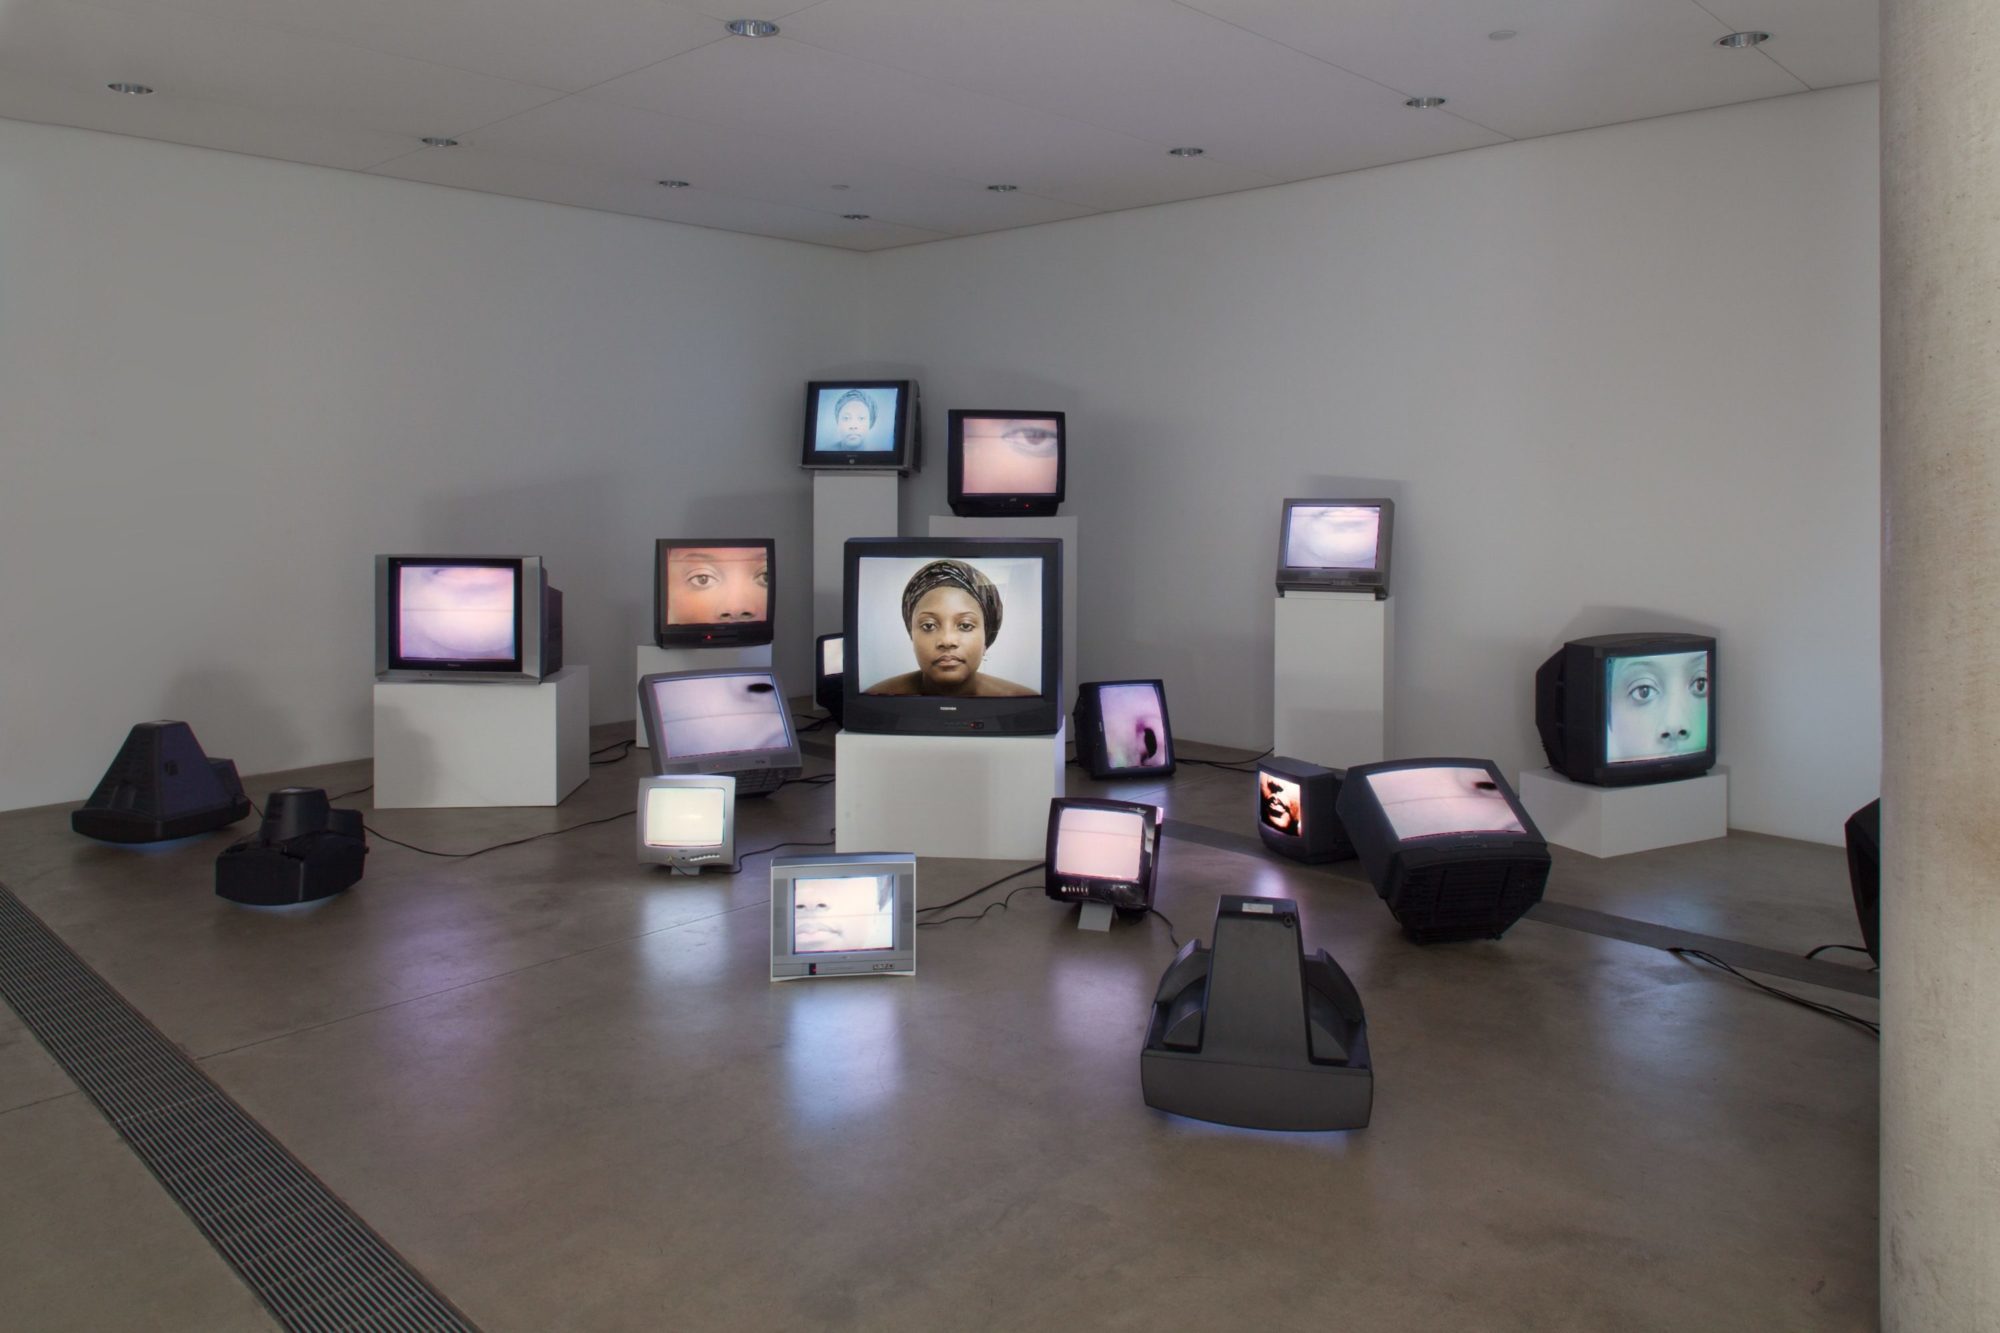 televisions of various sizes are arranged in a corner display images of a person's facial features